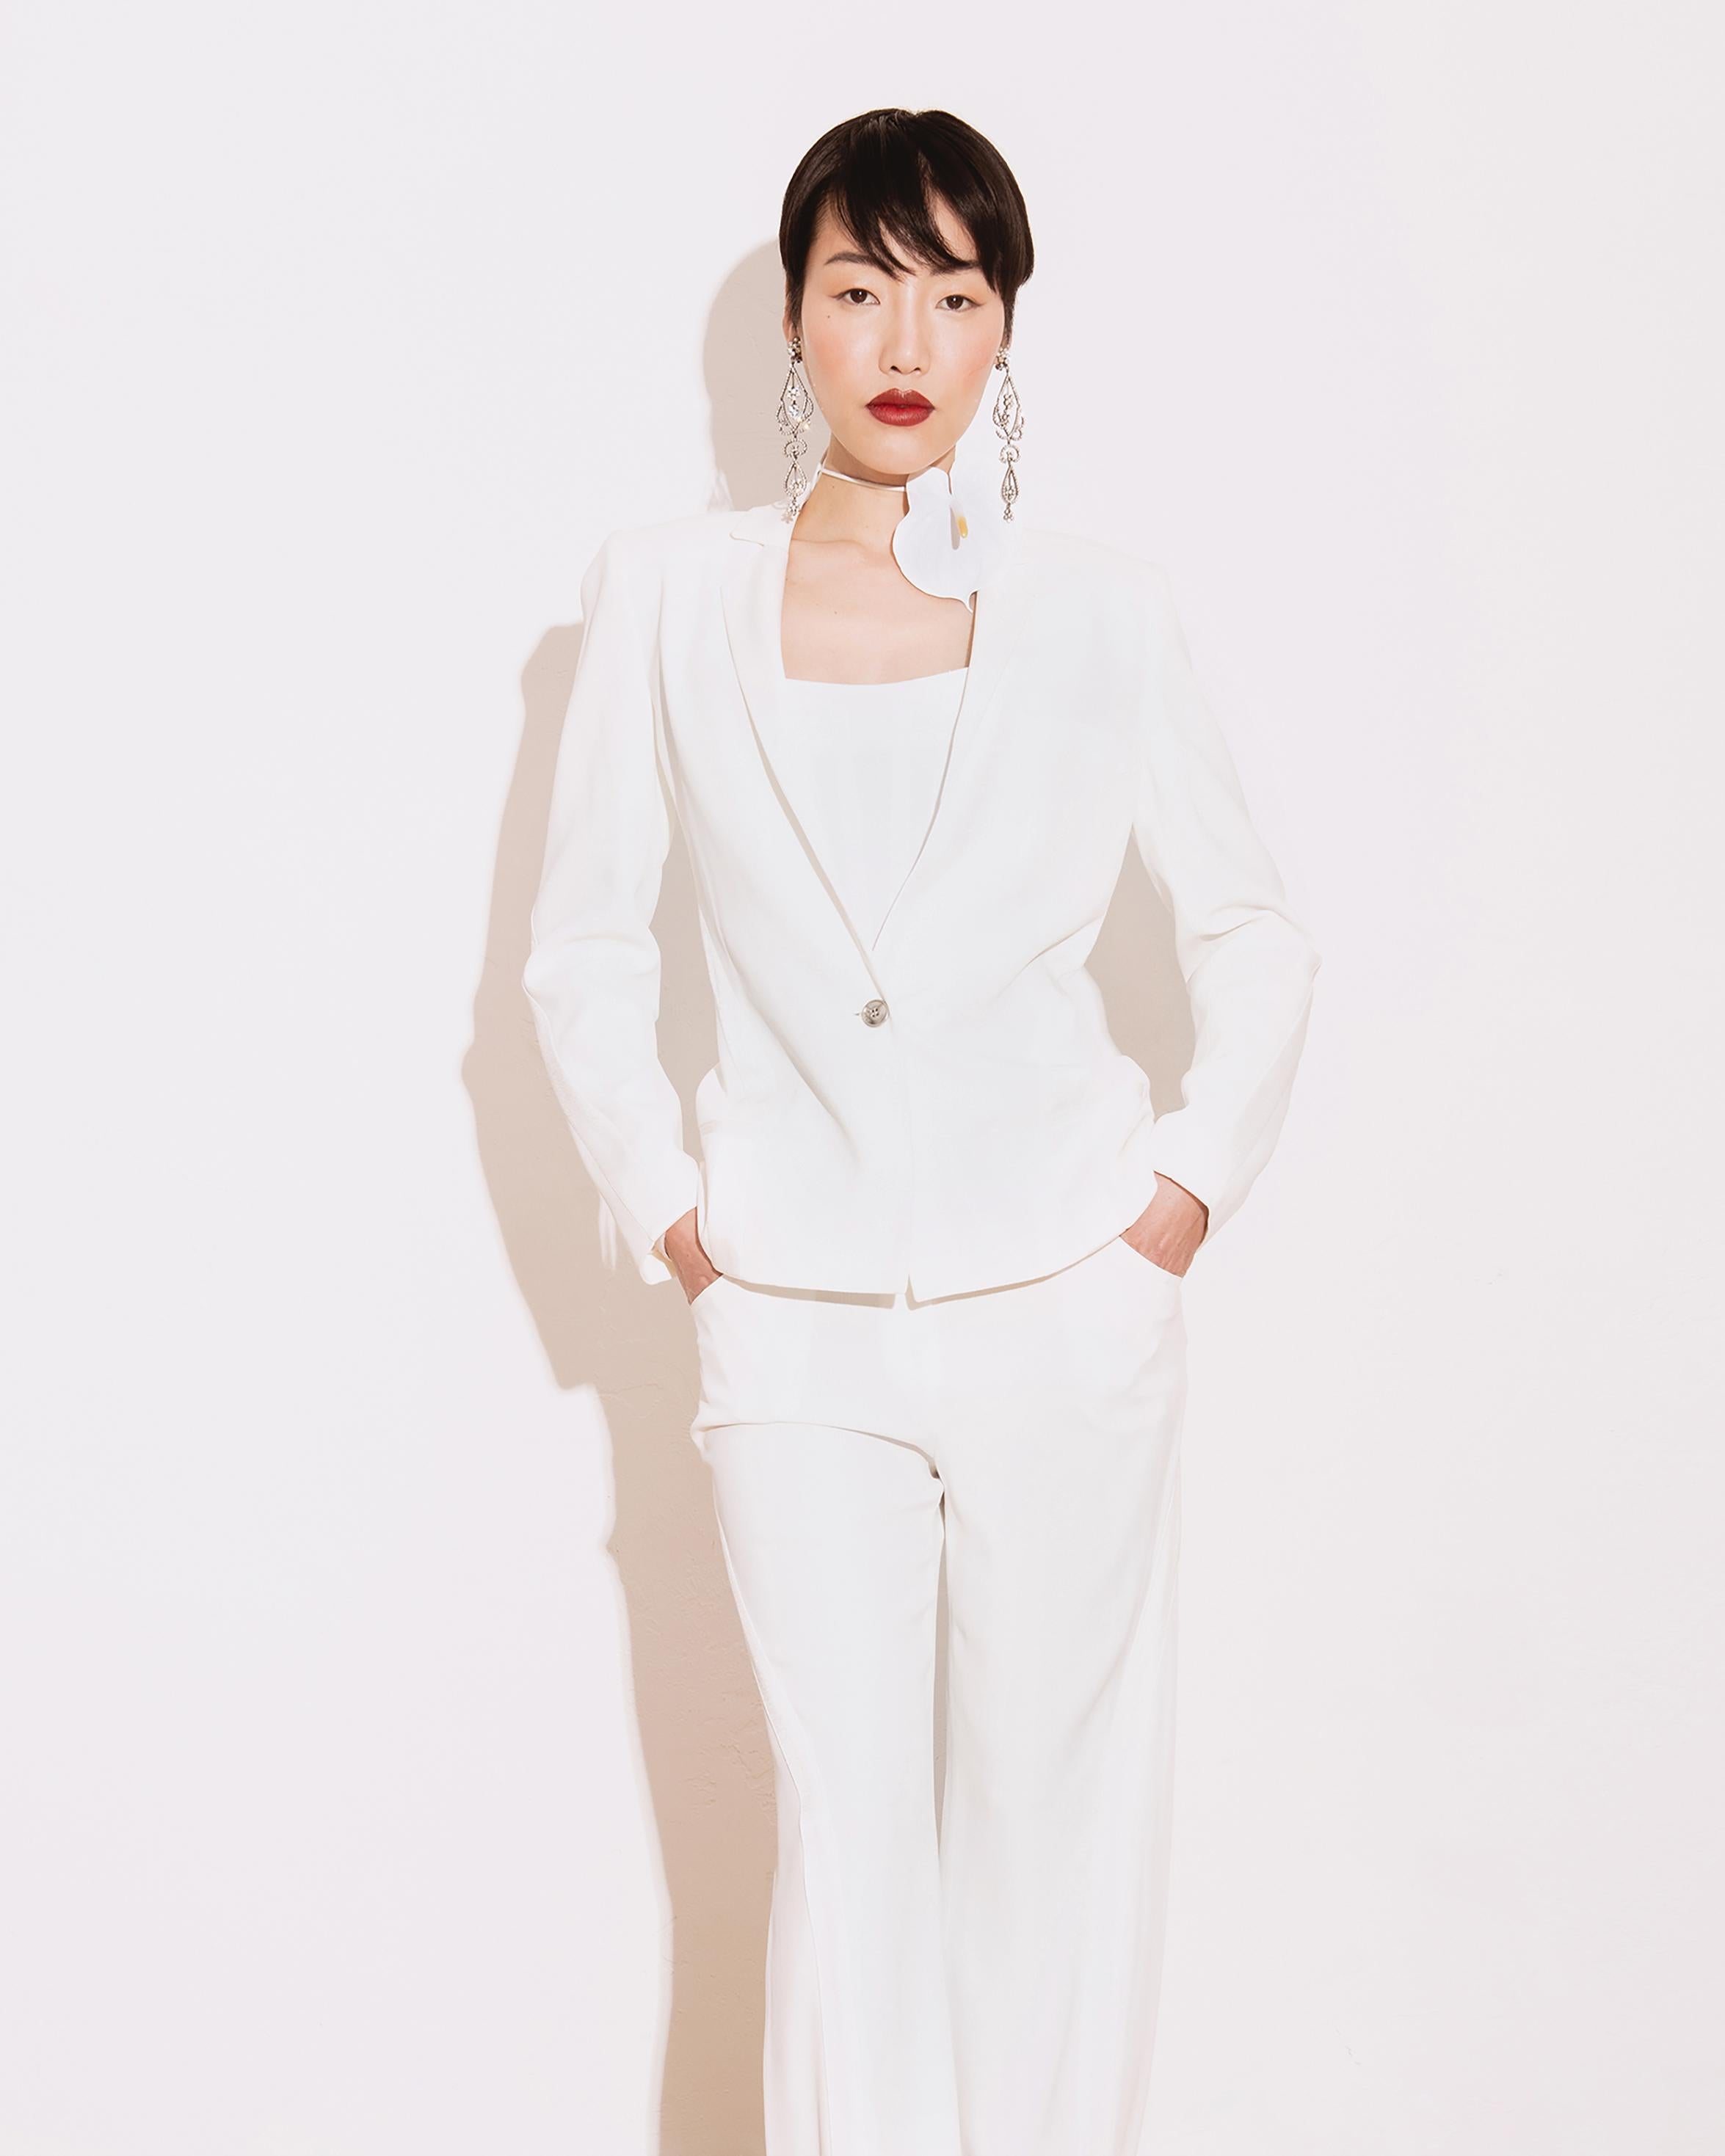 A/W 2004 Christian Dior by John Galliano white satin smoking pant suit set with curved silk paneling. White blazer jacket with single stamped Dior button and mid-rise trousers with very slight flare at hem. 

Measurements:
JACKET
Pit to Pit: 17